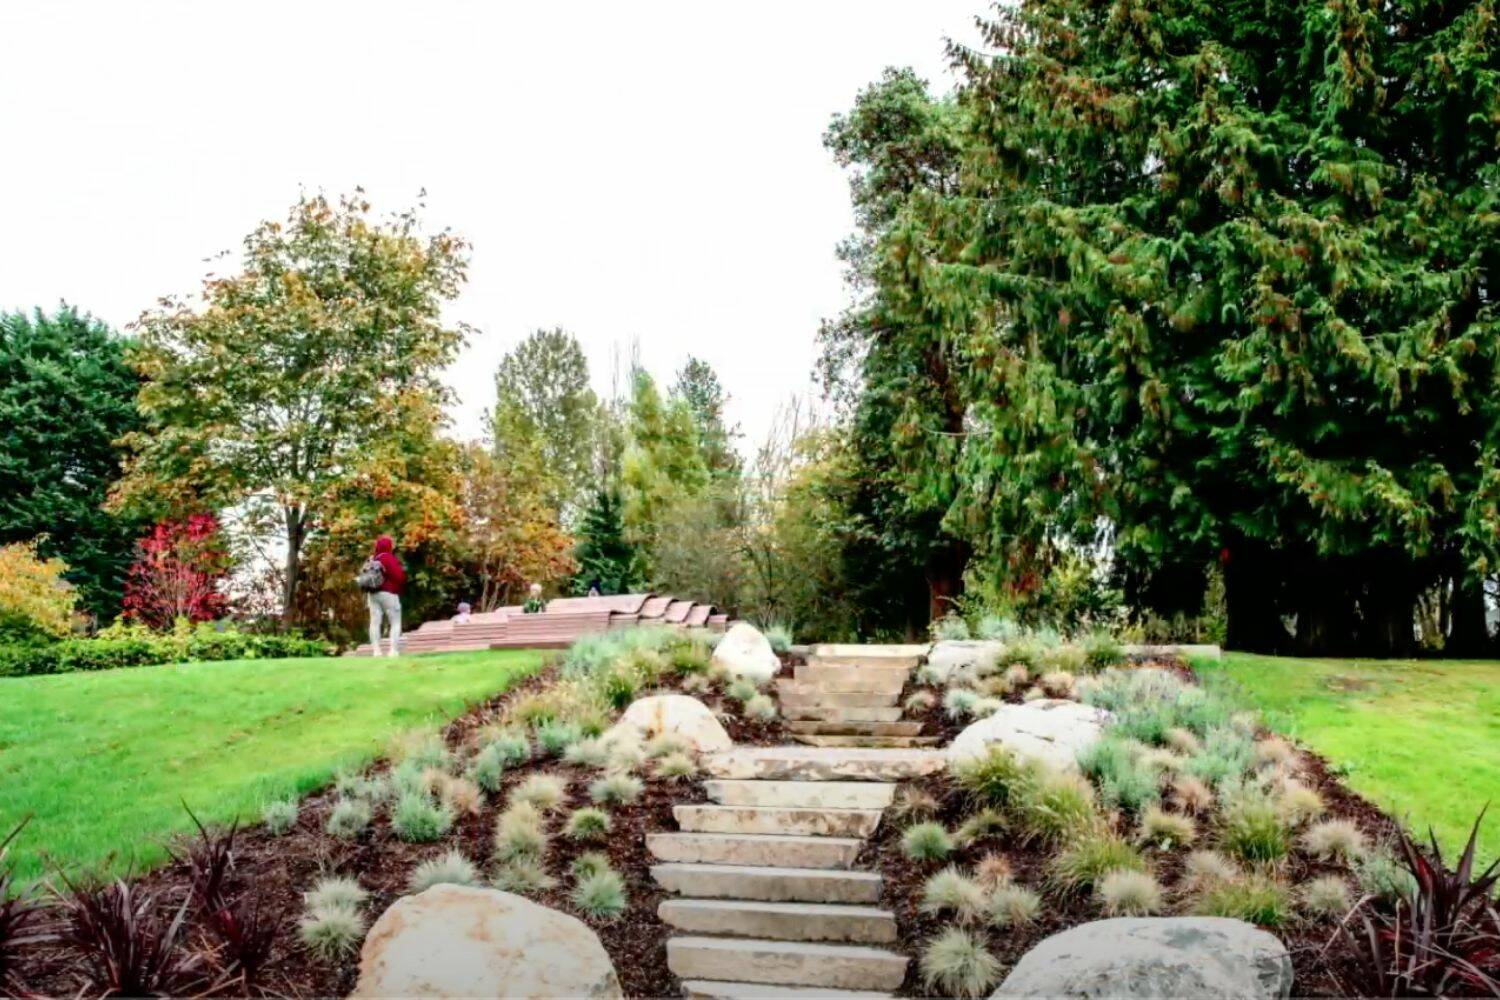 New landscaping at Chestnut Ridge Park. (Screenshot from City of Kent Youtube page)